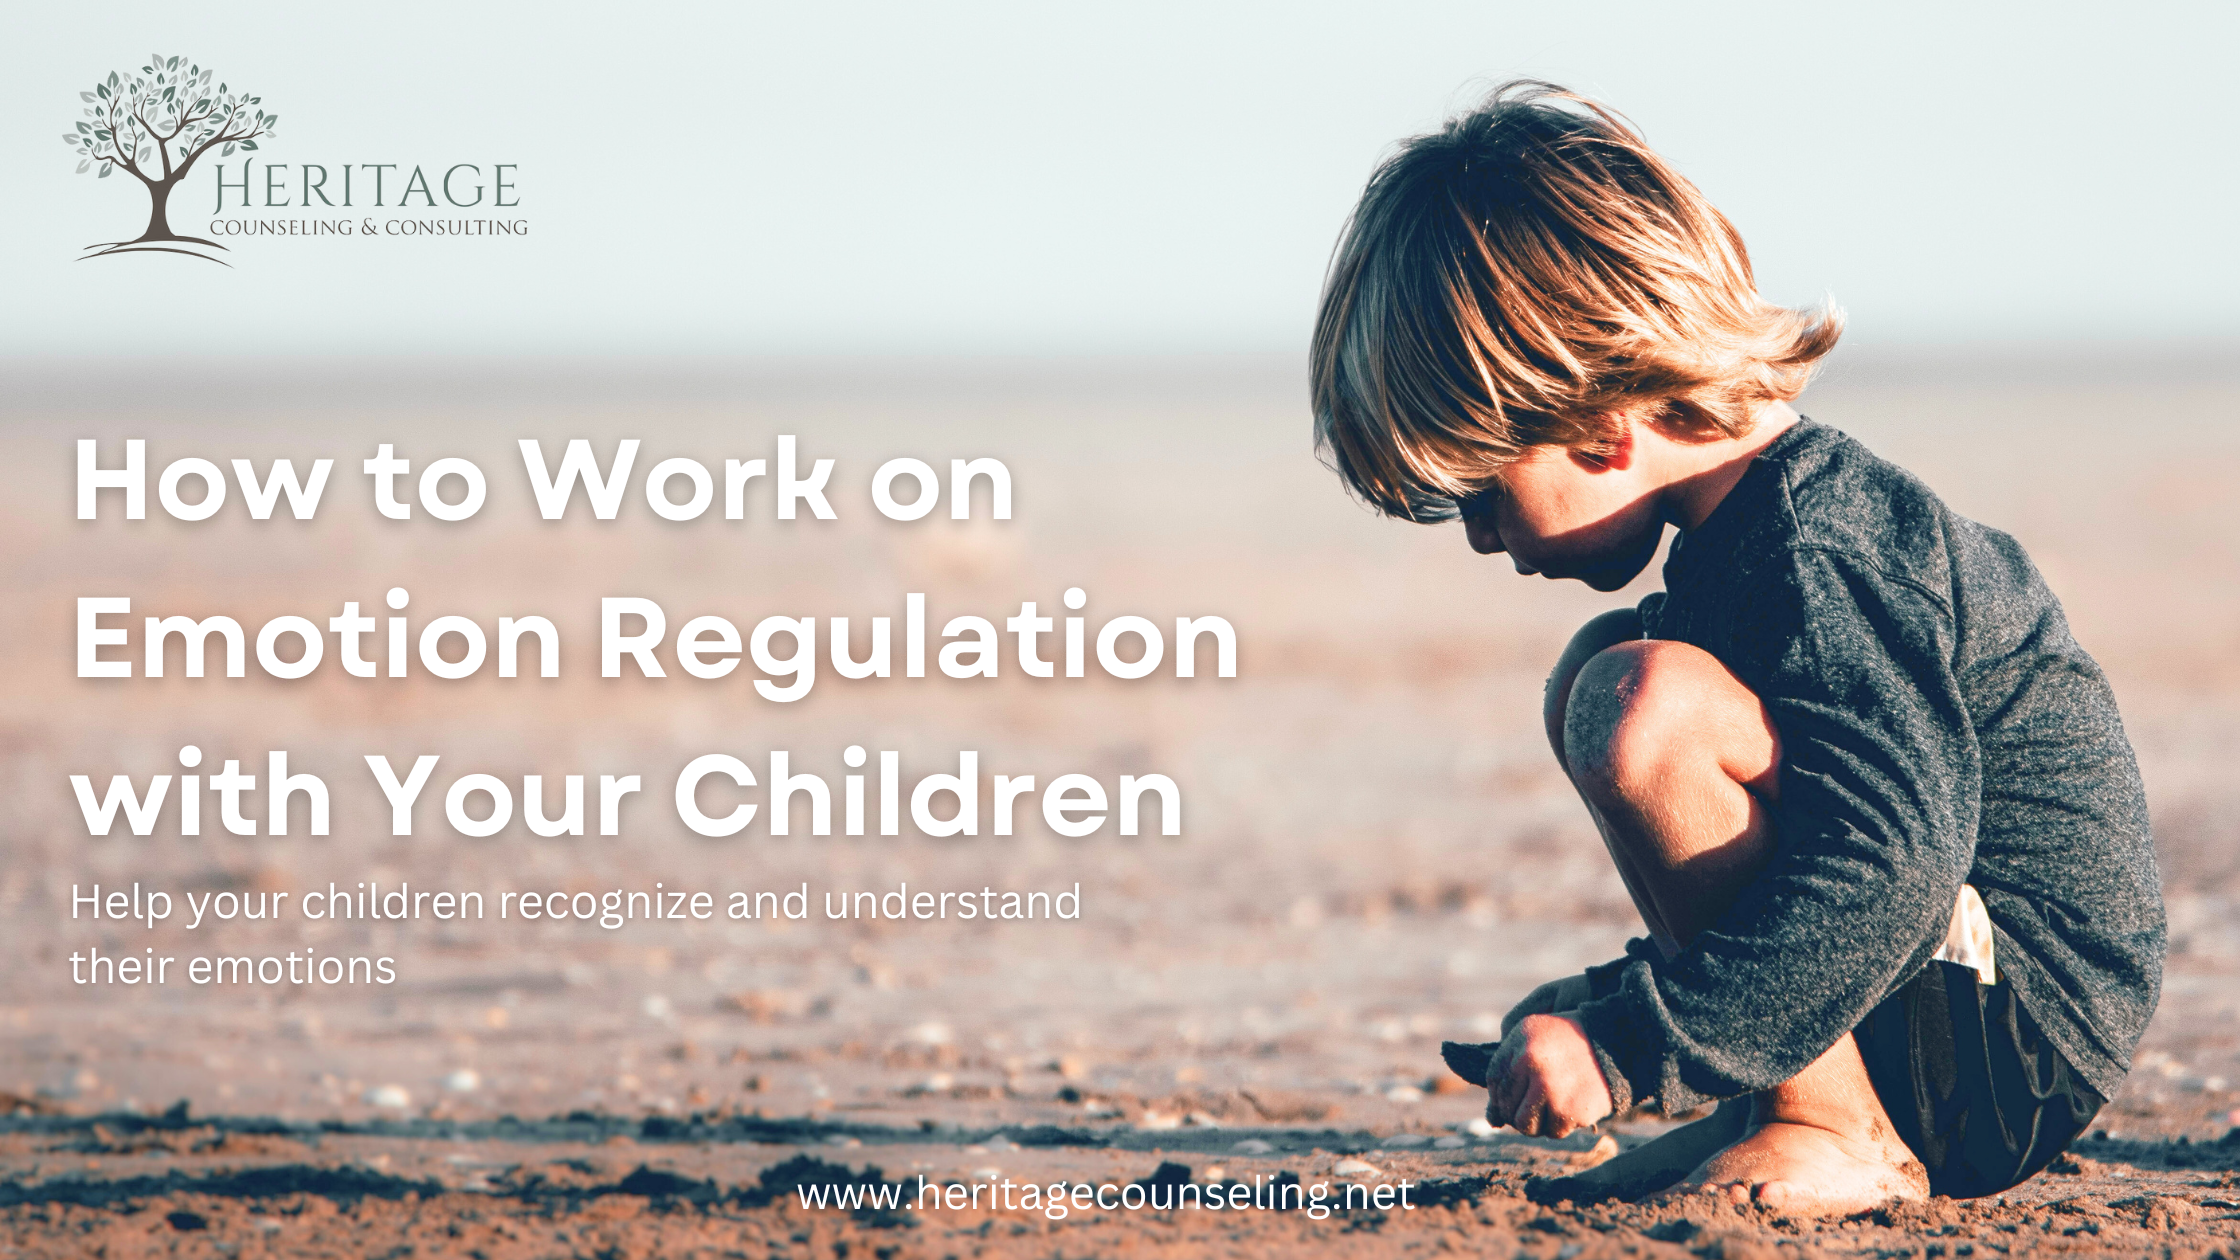 How to Work on Emotion Regulation with Your Children